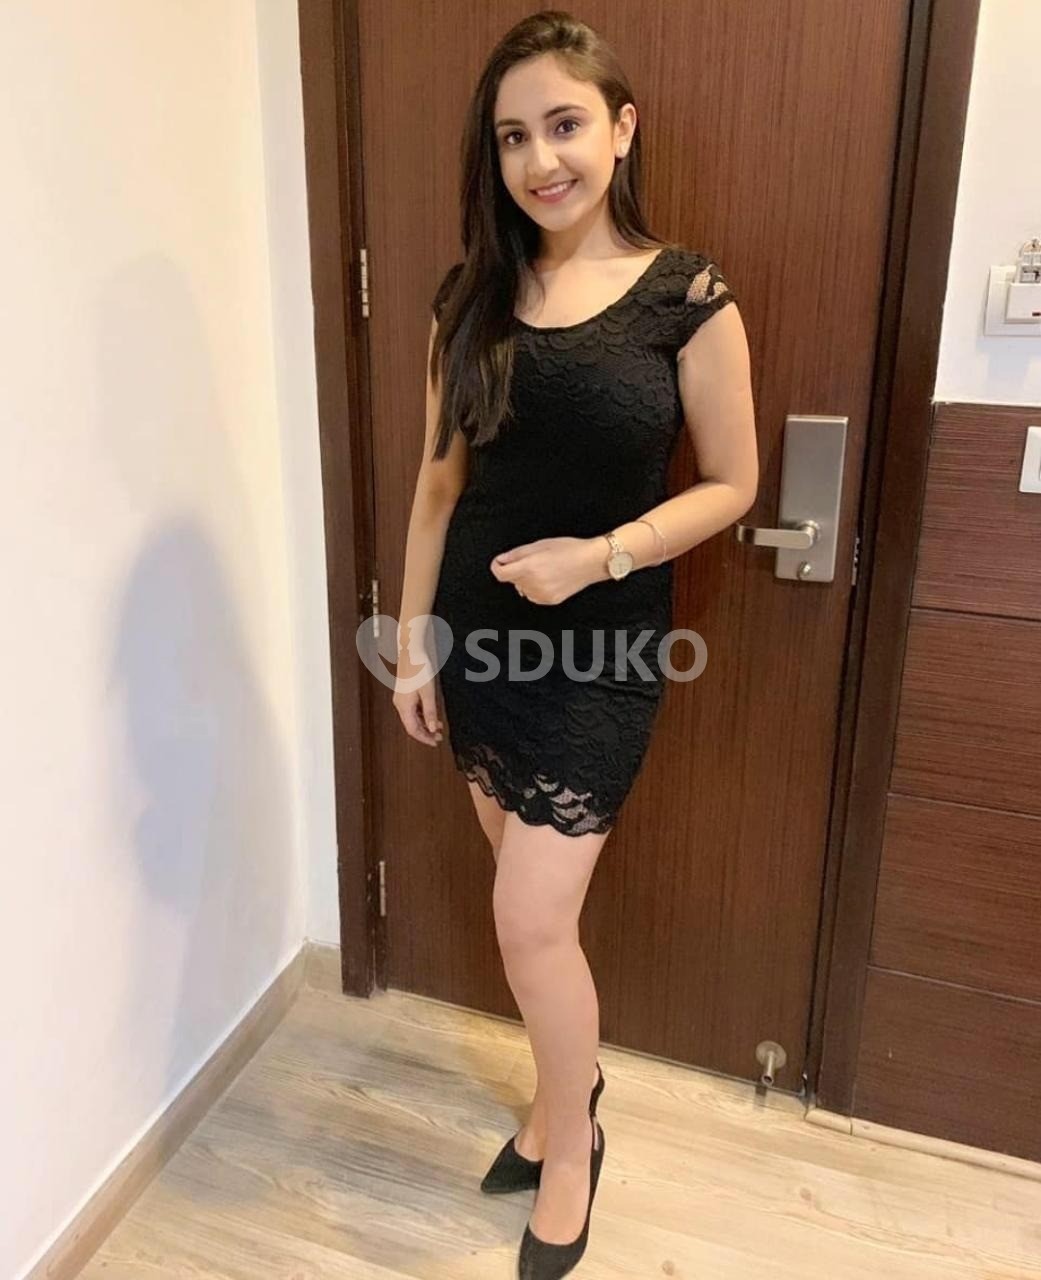 Ludhiana 🥰🔥LOW PRICE INDEPENDENT DAY-NIGHT VIP HOTTEST MODELS COLLEGE GIRLS AVAILABLE 💯 SAFE SECURE FULL SATISF